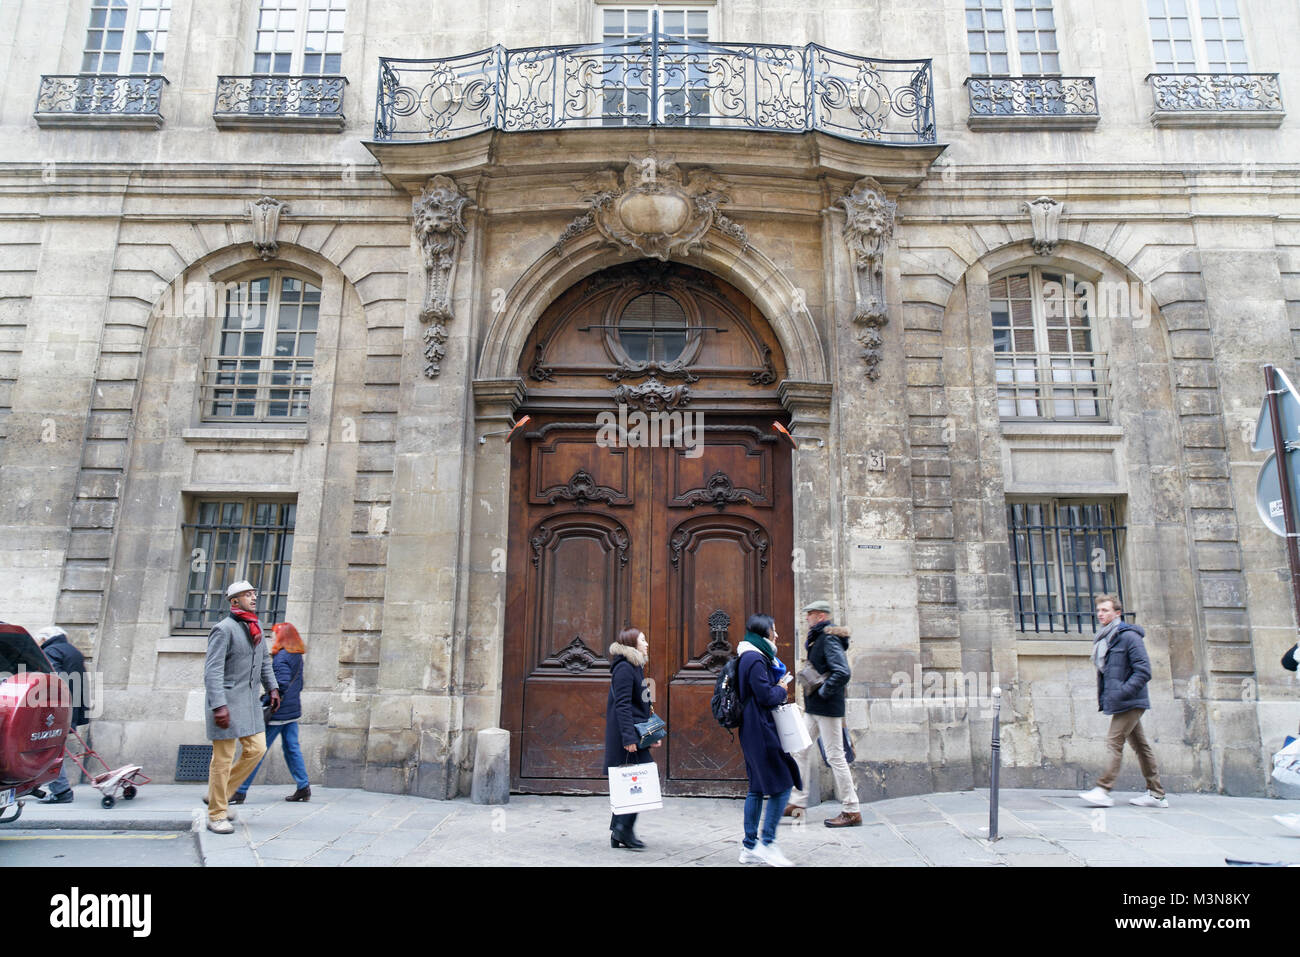 The Hotel d’Albret at 31, rue des Francs Bourgeois in the Marais district of Paris. It was erected initially in the 16th century with later additions. Stock Photo